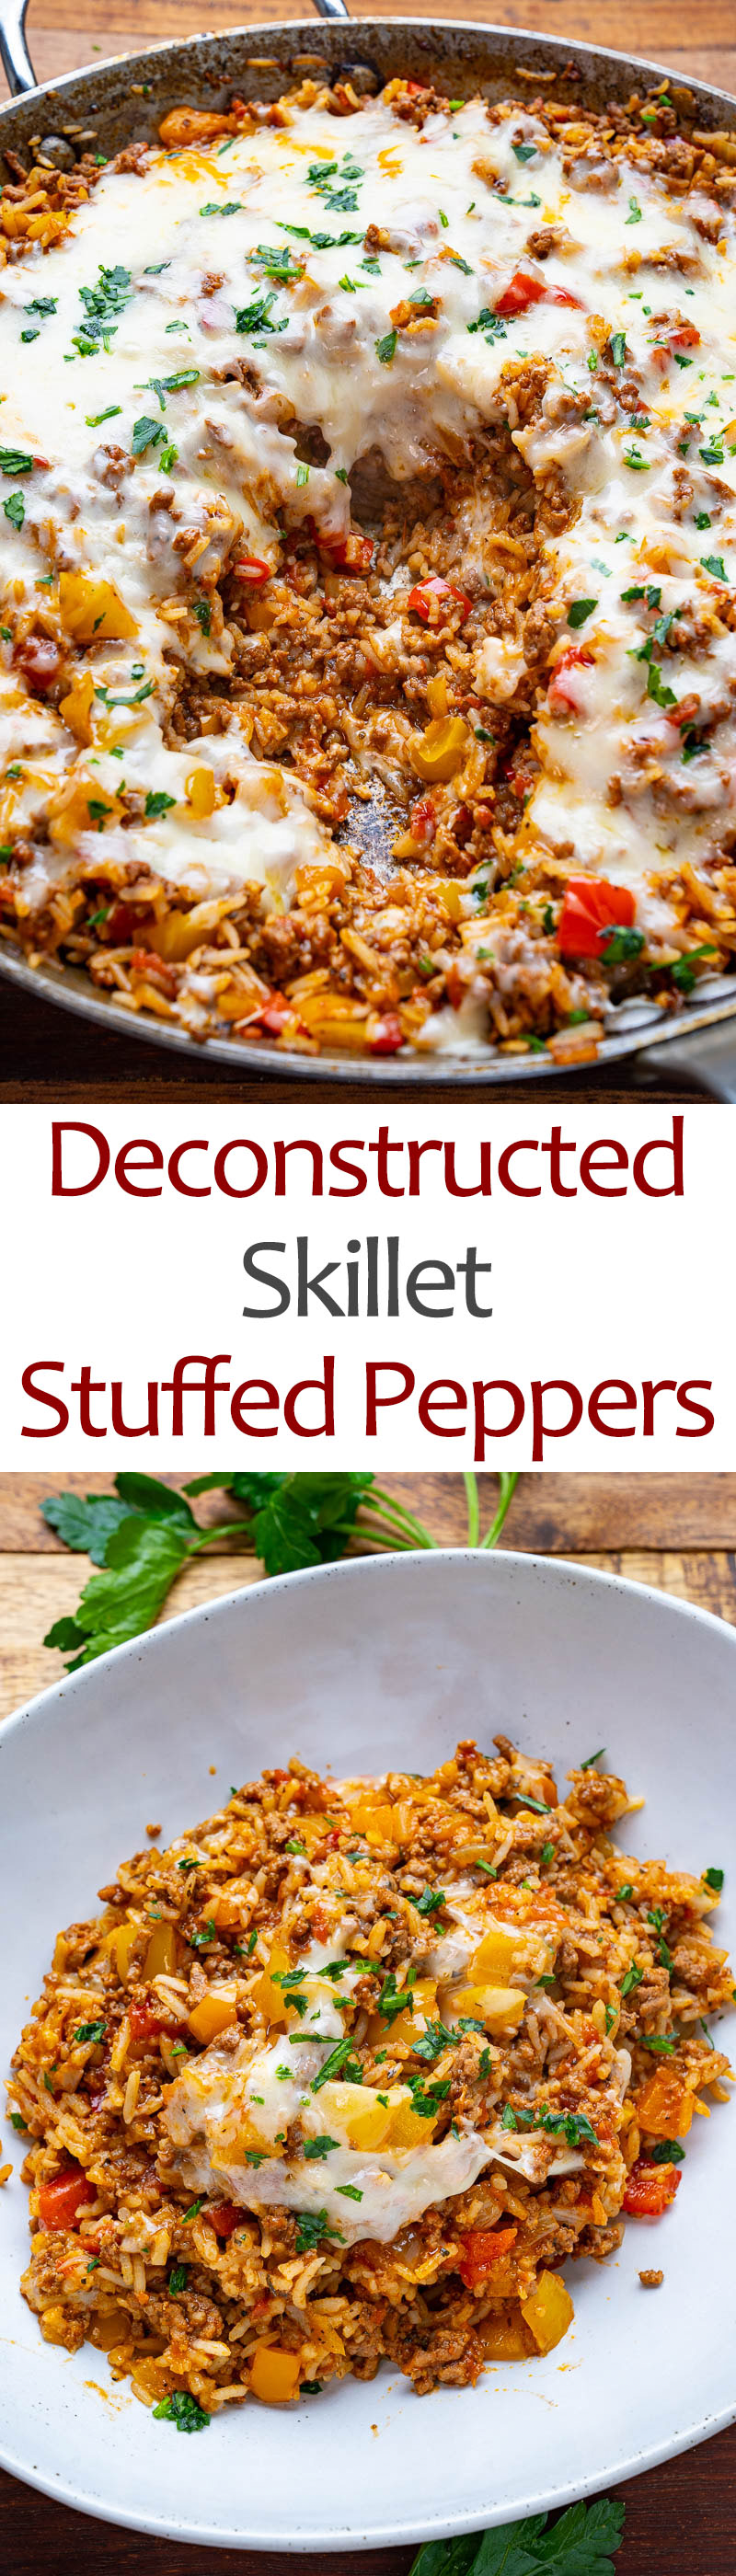 Deconstructed Skillet Stuffed Peppers